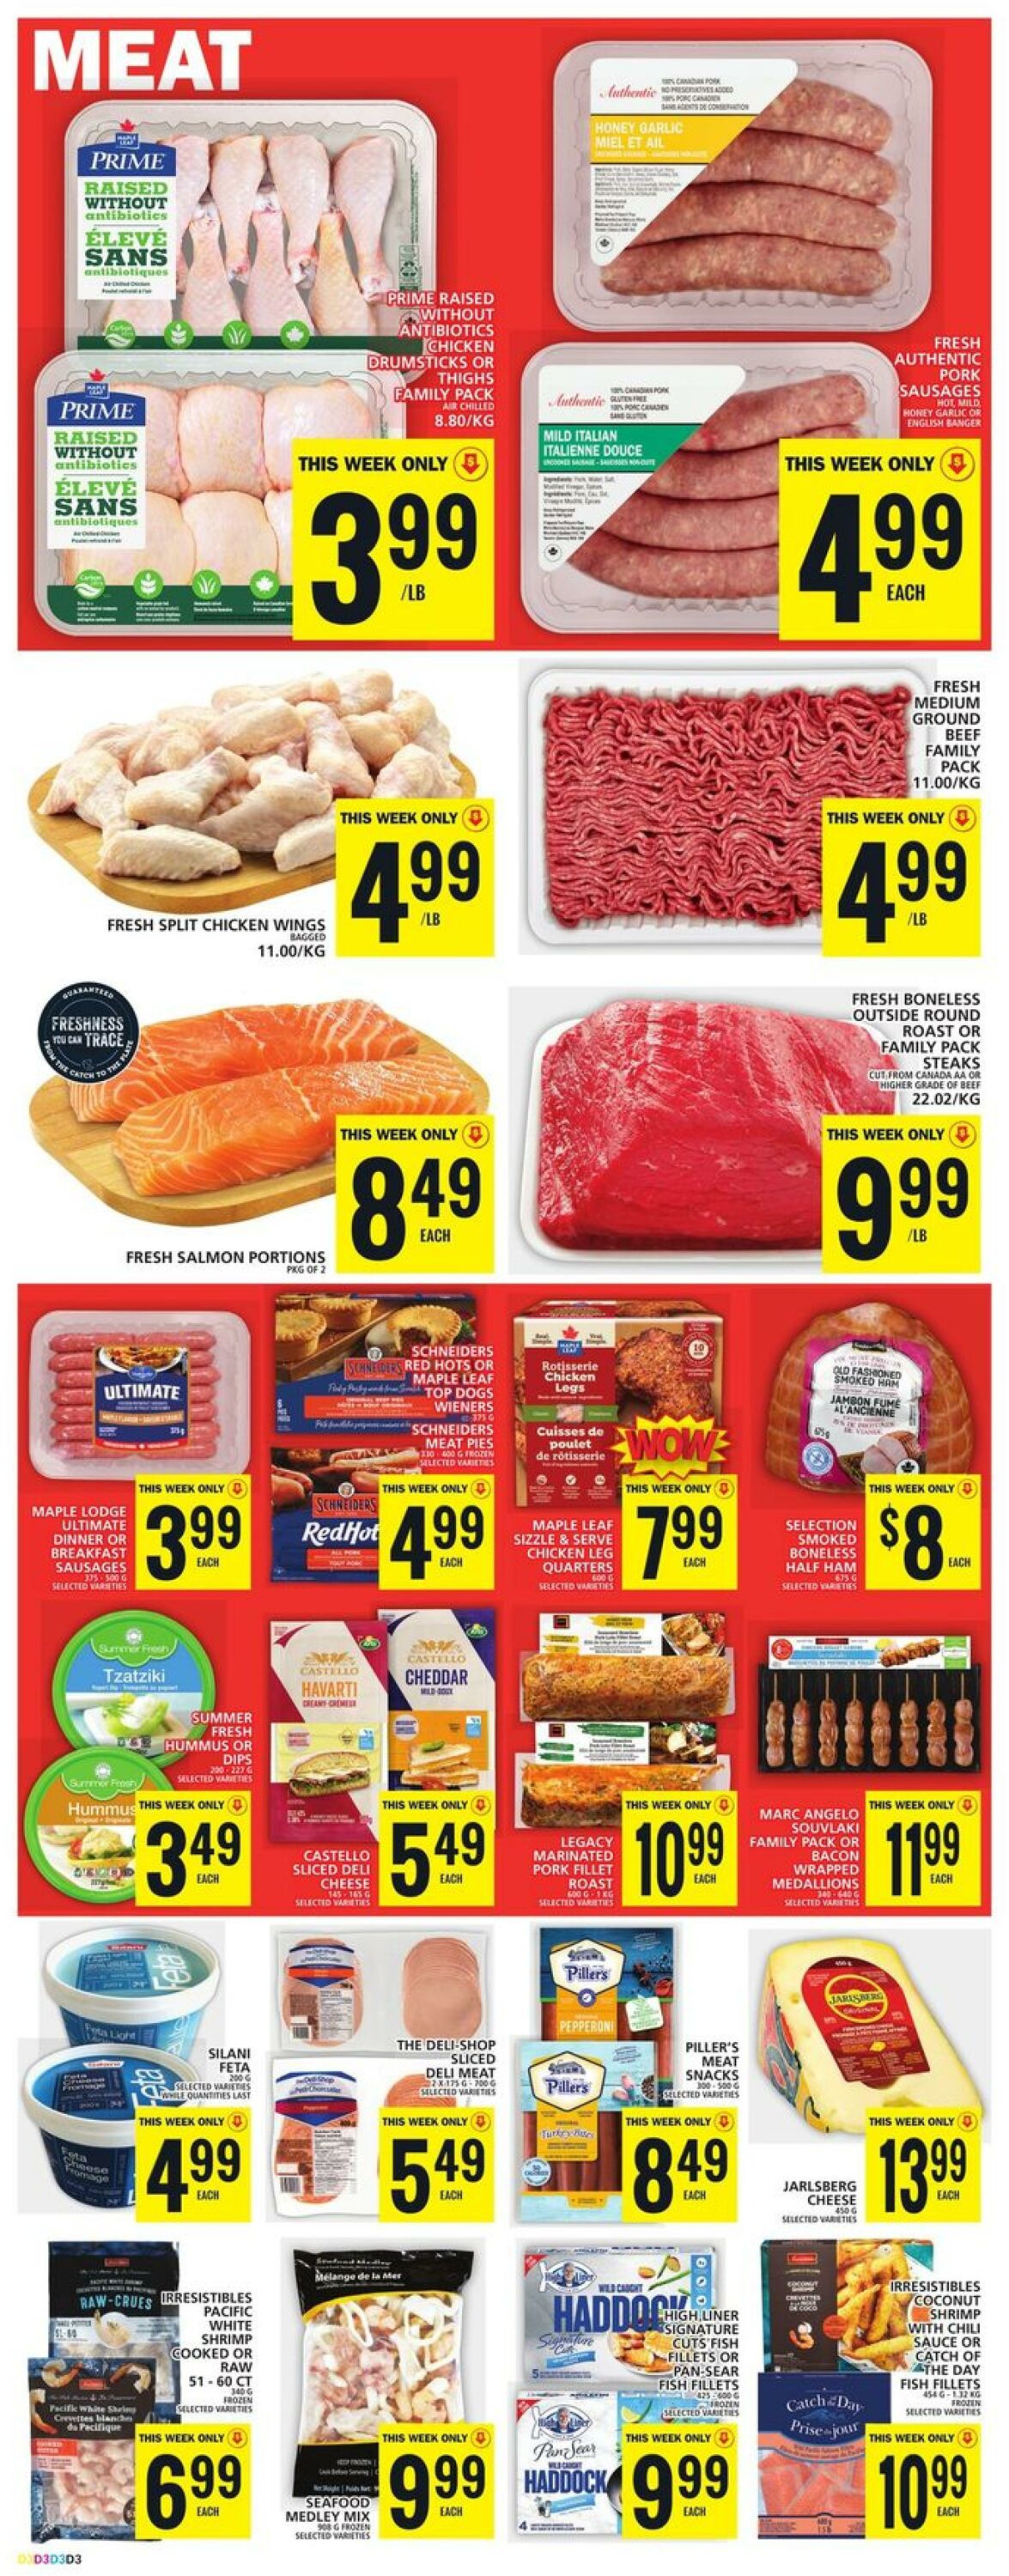 Food Basics Promotional Flyer - Christmas - Valid from 07.12 to 13.12 ...